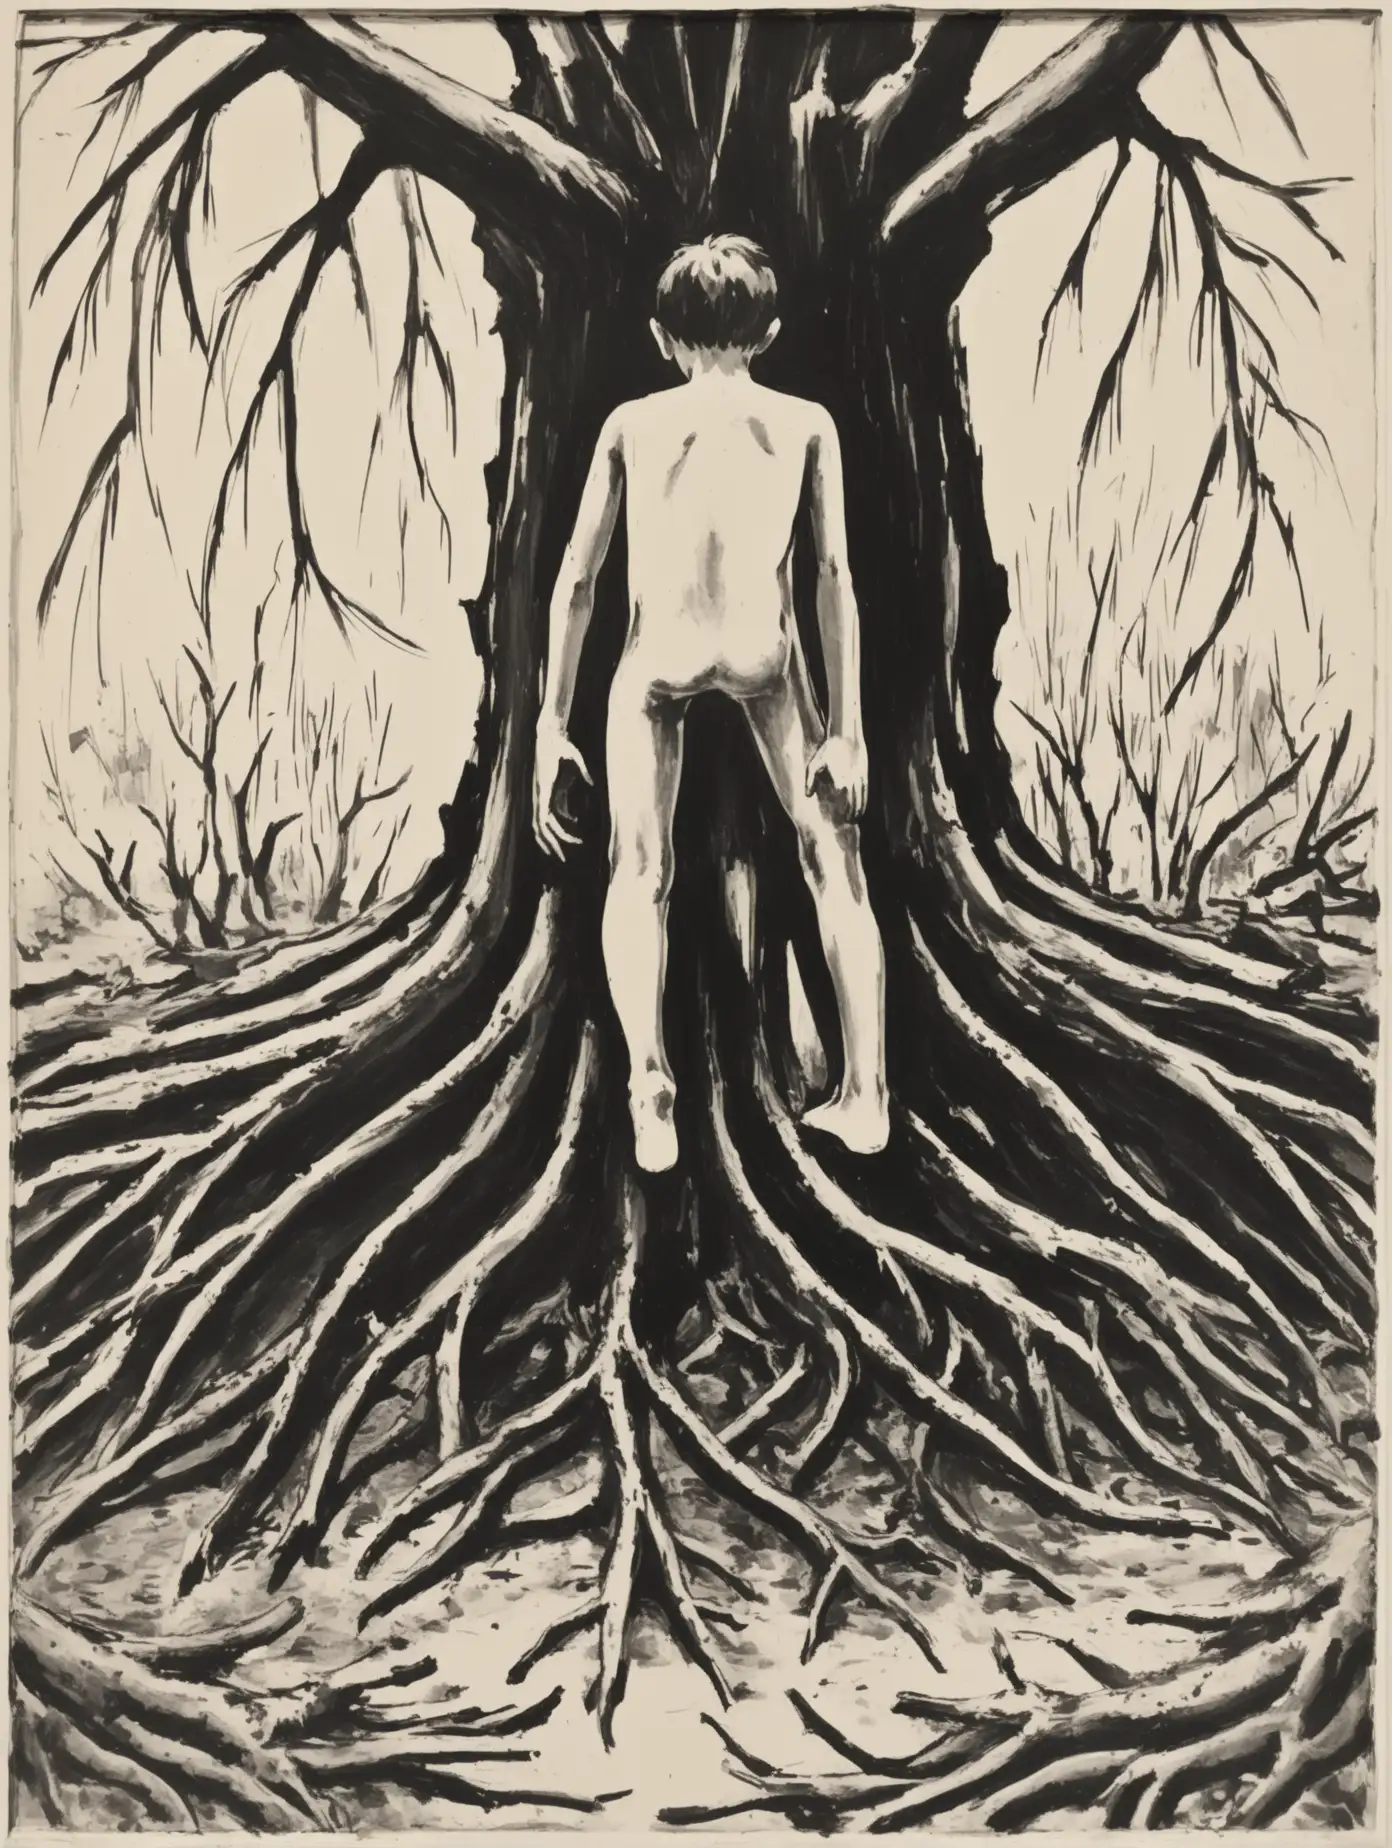 Vintage Black and White Art Boy with Tree Root Legs